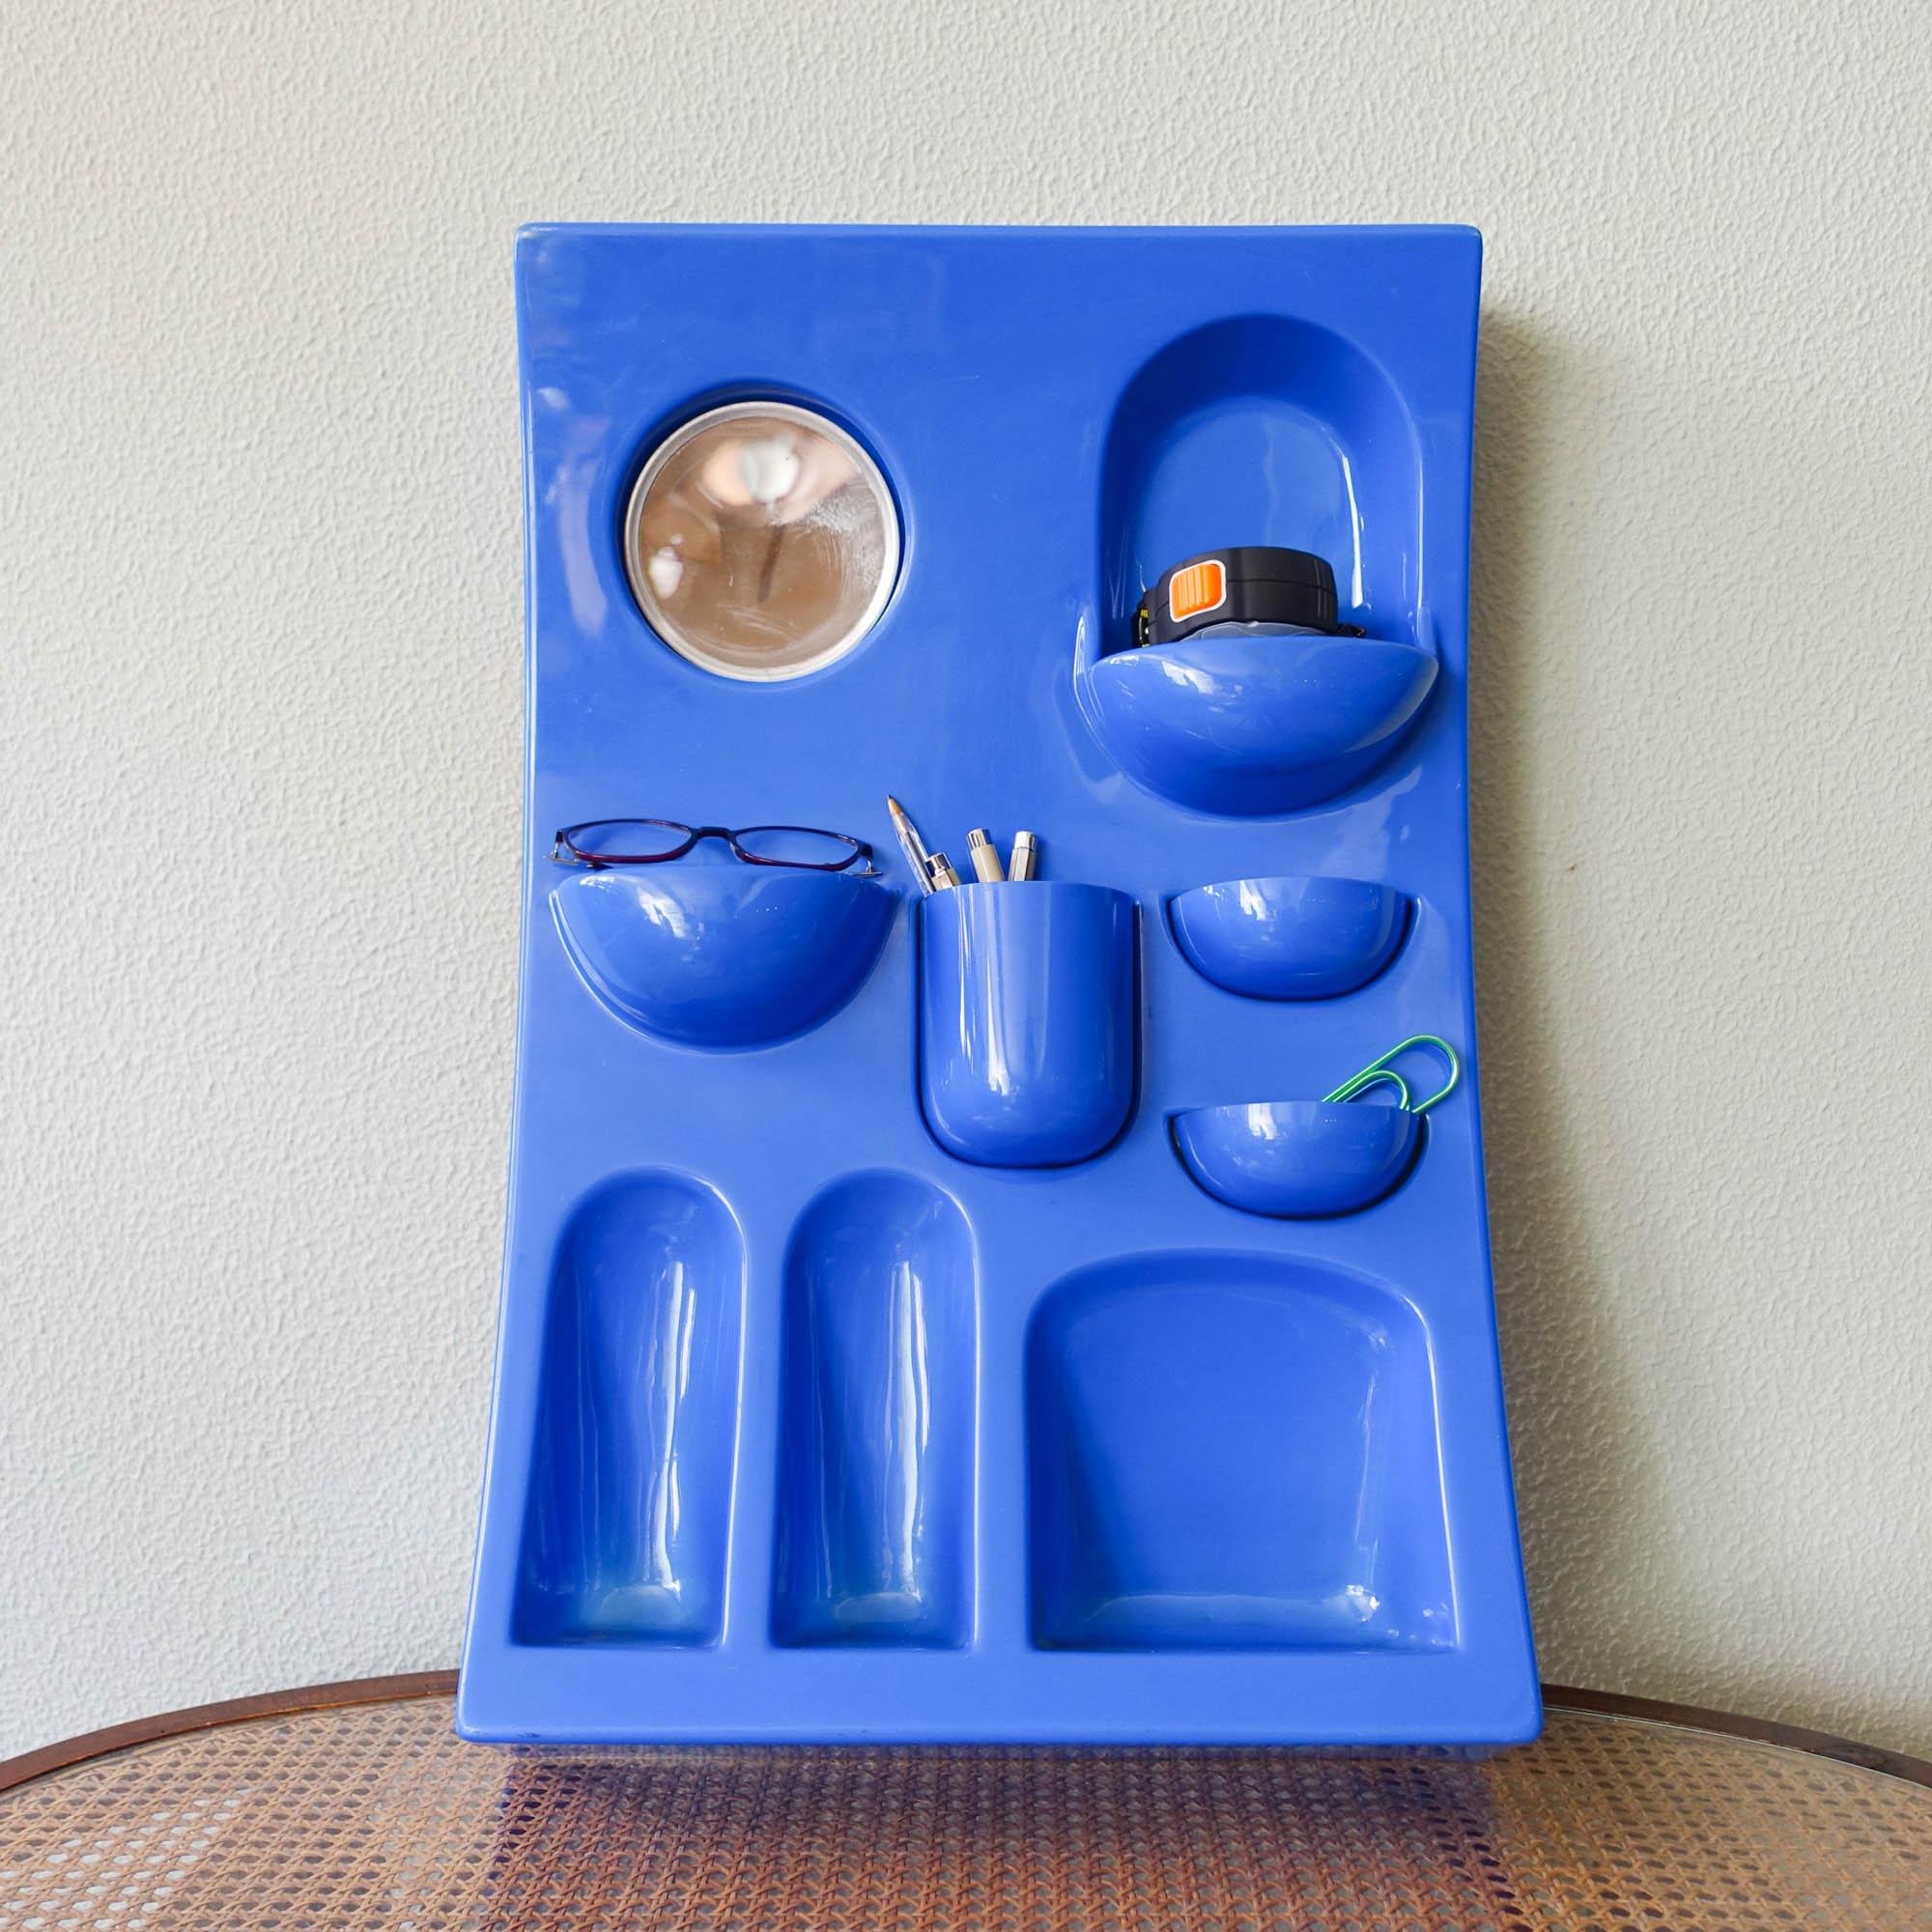 A blue ABS plastic wall organizer from the 1970s. Designed and produced by Visiva srl, Milano, Italy, during the 1970's. Similar with the Uten.Silo by Dorothee Becker for Vitra. With a variety of little pockets, containers, shelves and a mirror.